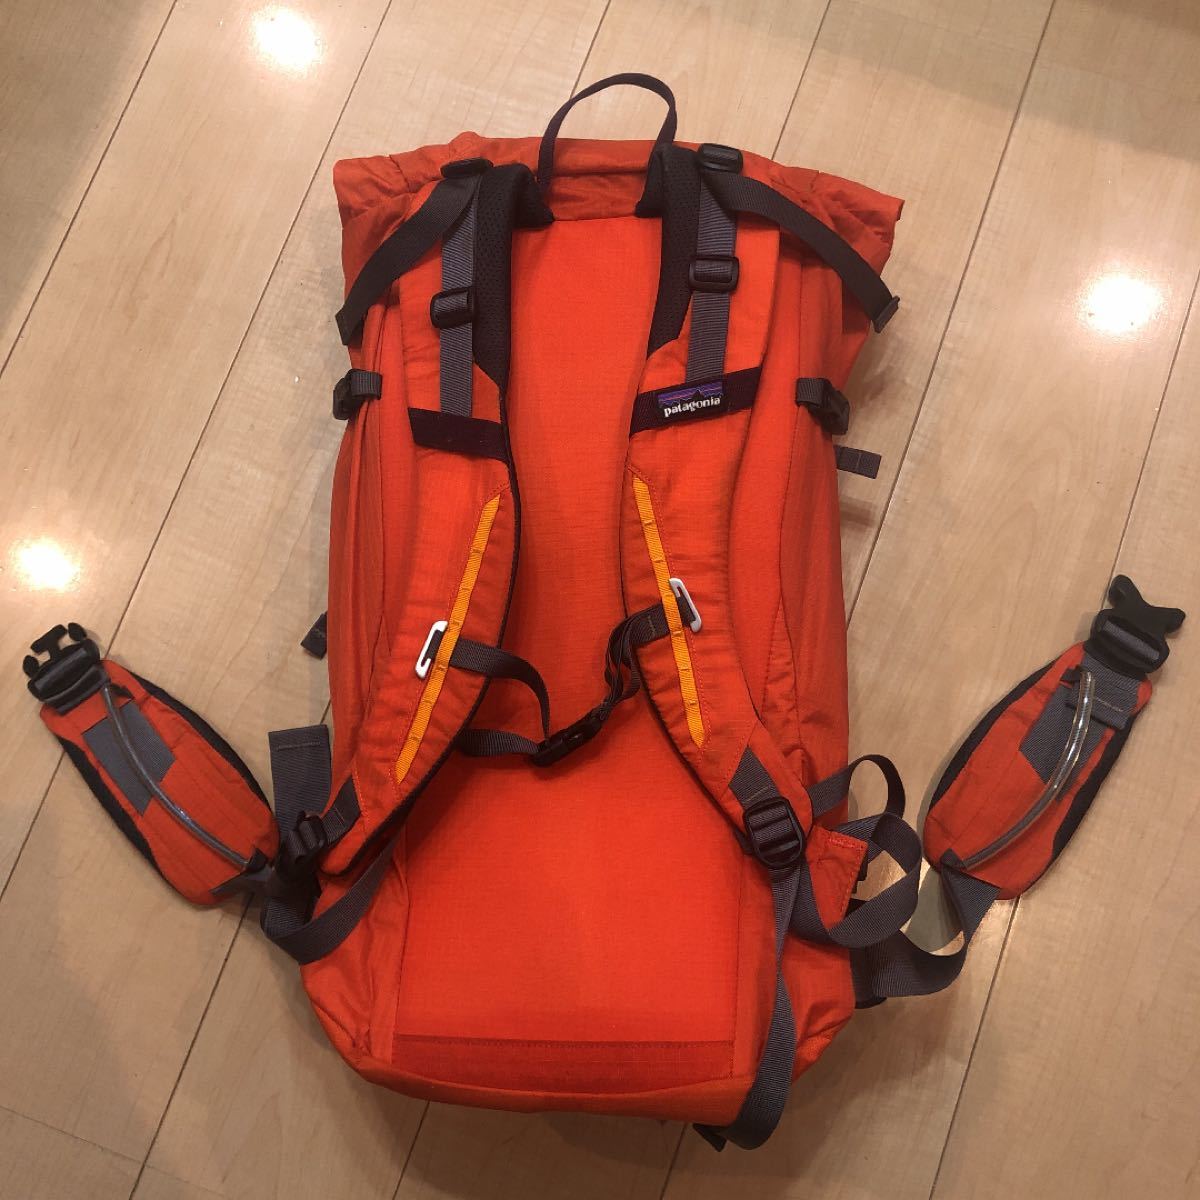 patagonia[パタゴニア]Ascensionist Pack 35L used